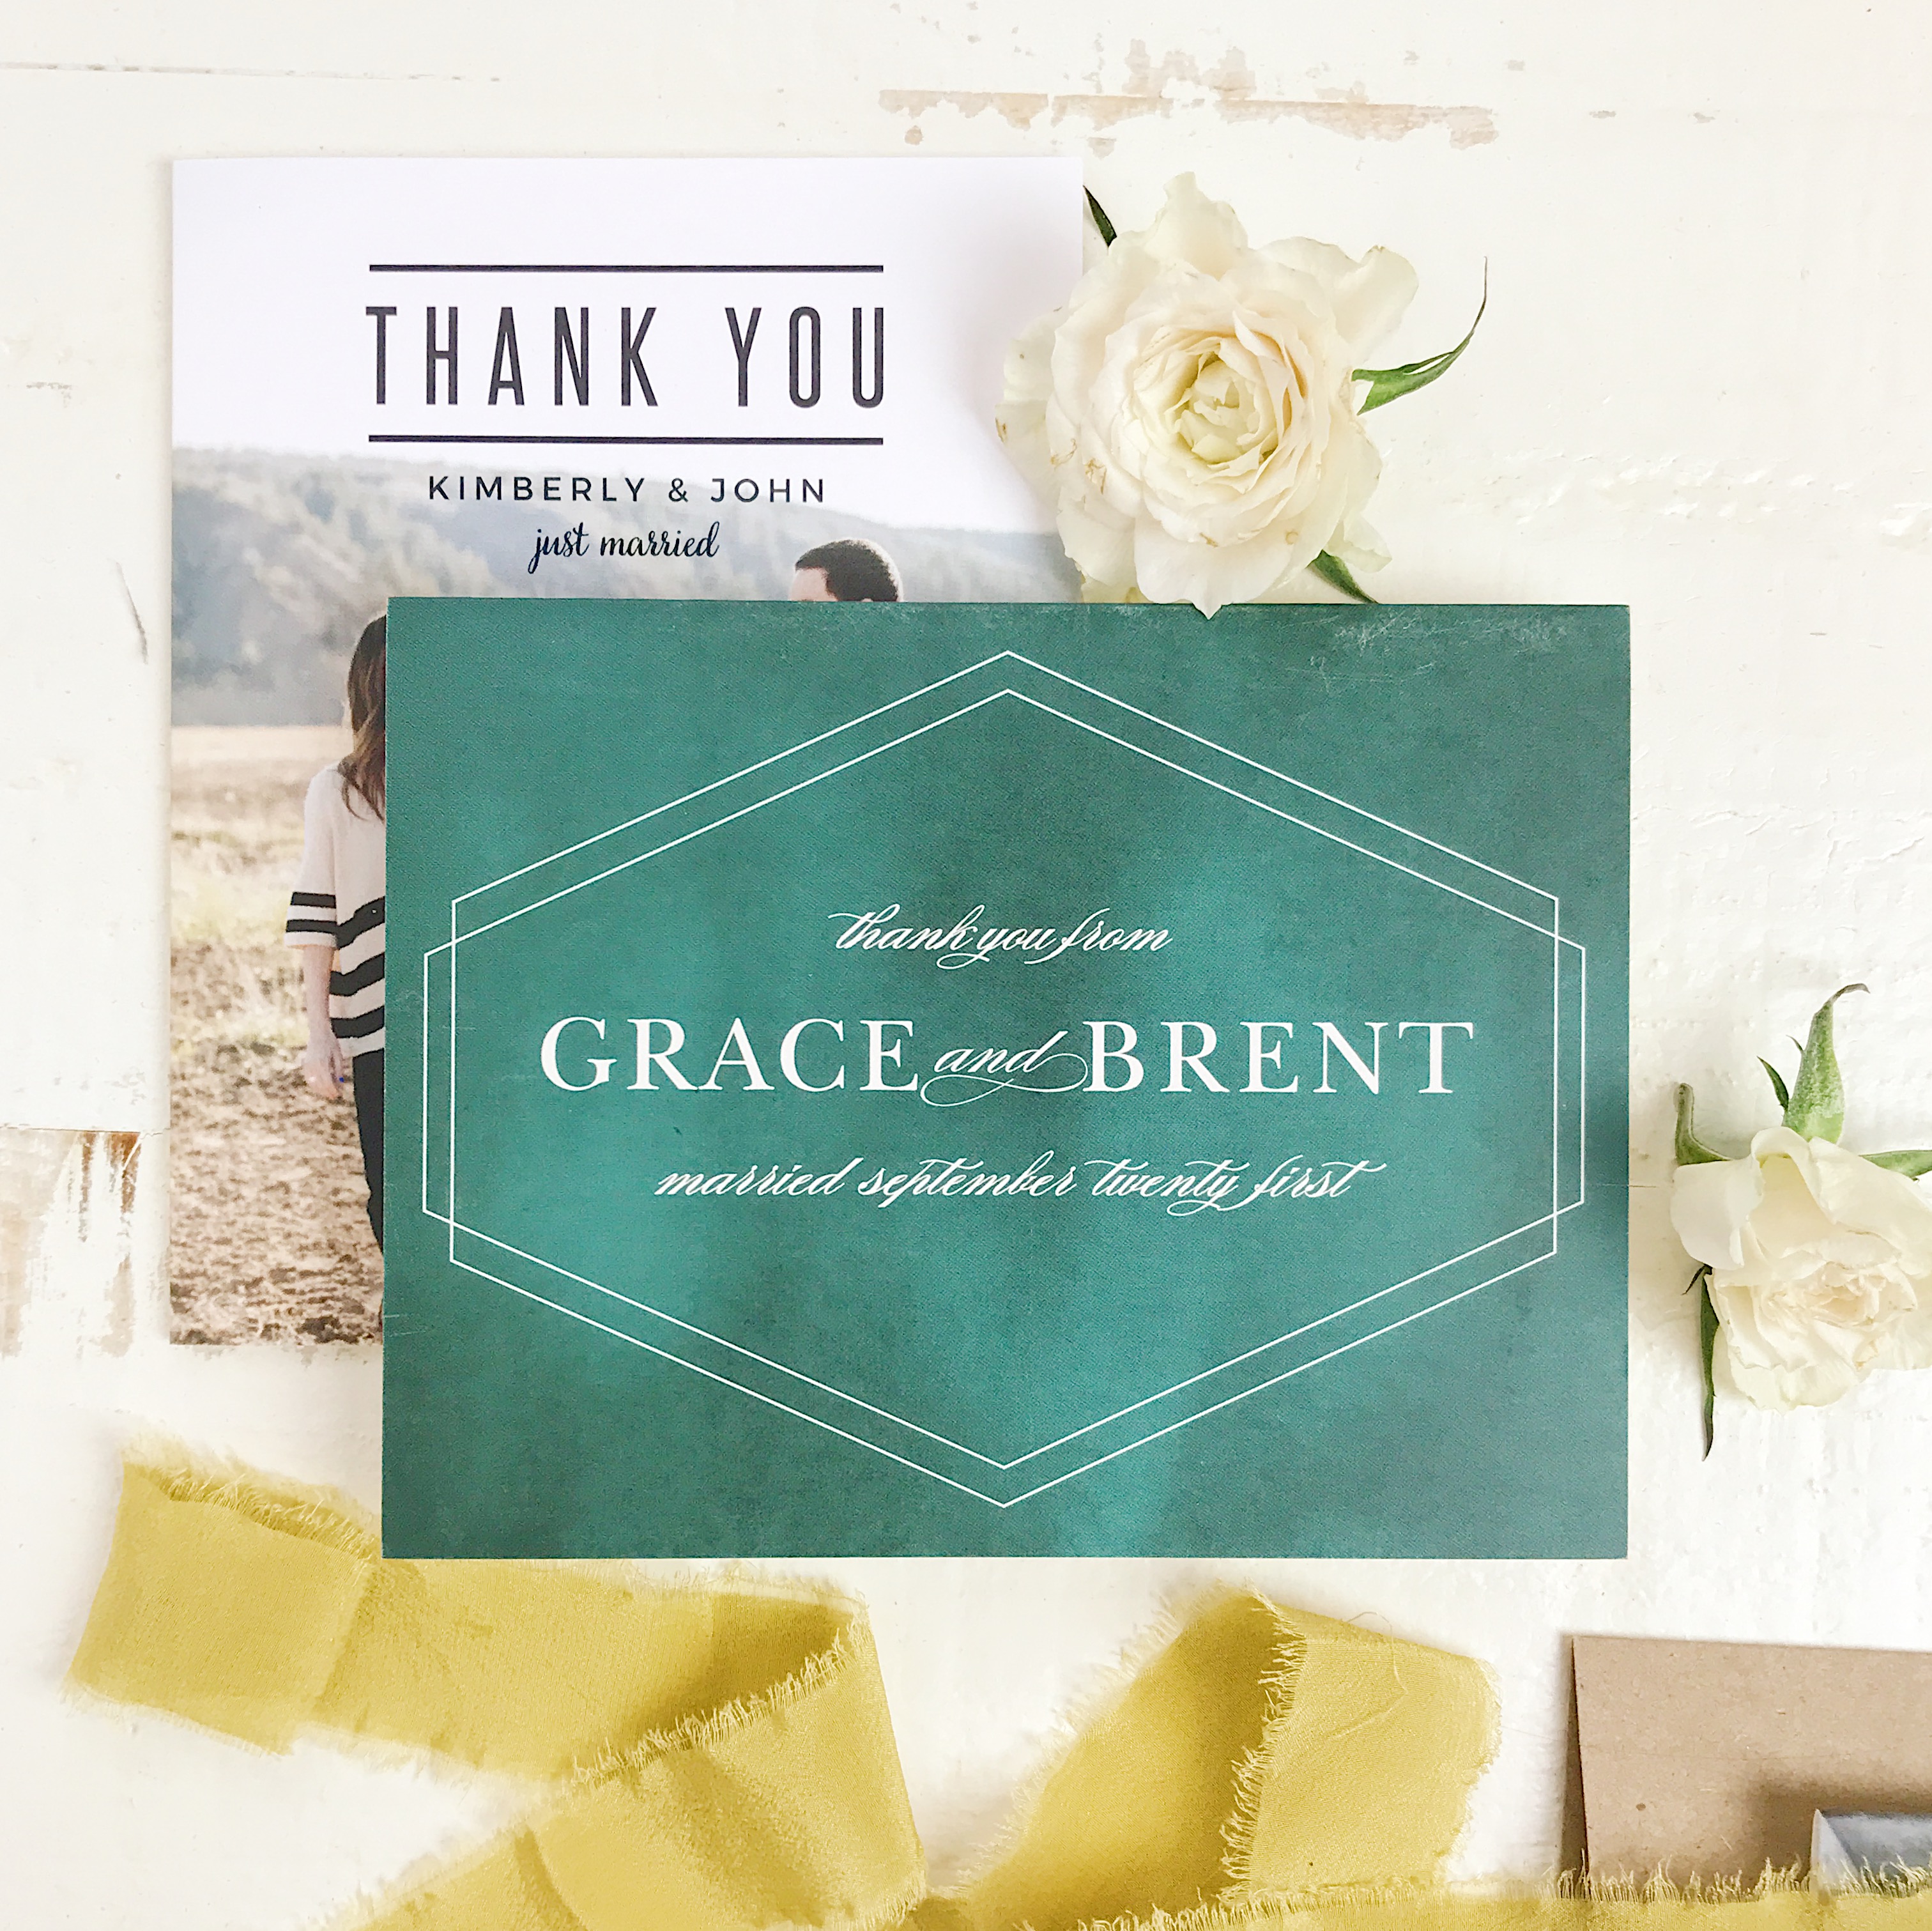 Thankful for Thank You Notes from Basic Invite – The Bitter Socialite